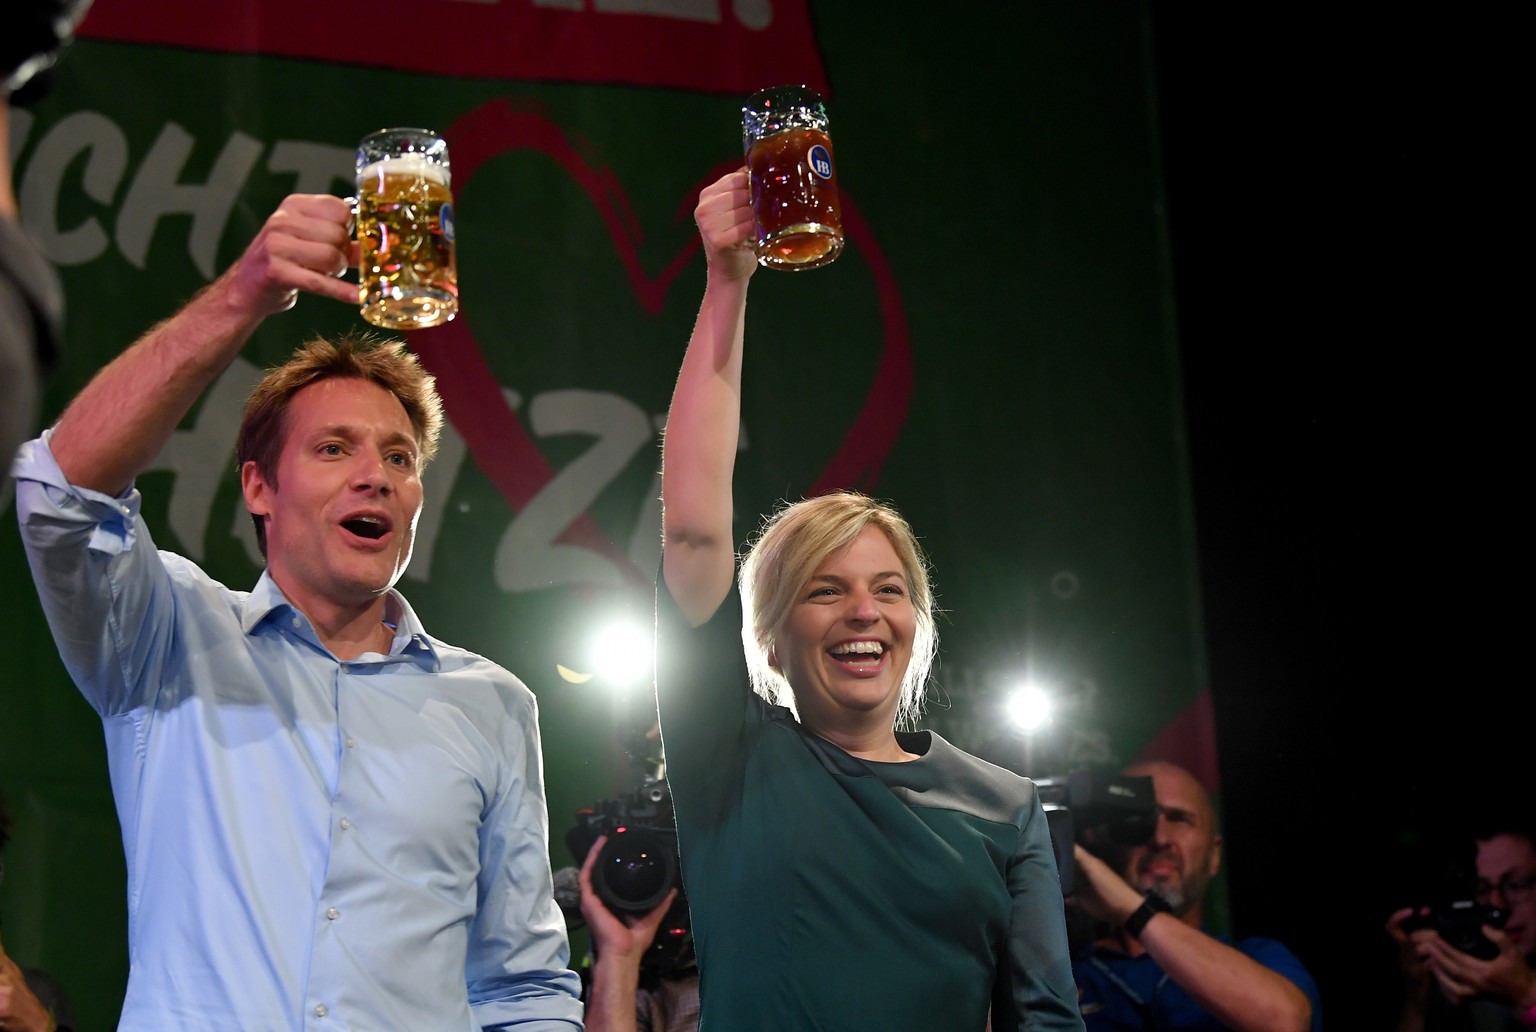 epa07093460 Alliance 90/The Greens party leading candidates Ludwig Hartmann (L) and Katharina Schulze (R) celebrate on an election event during the Bavaria state elections in Munich, Germany, 14 Octob ...